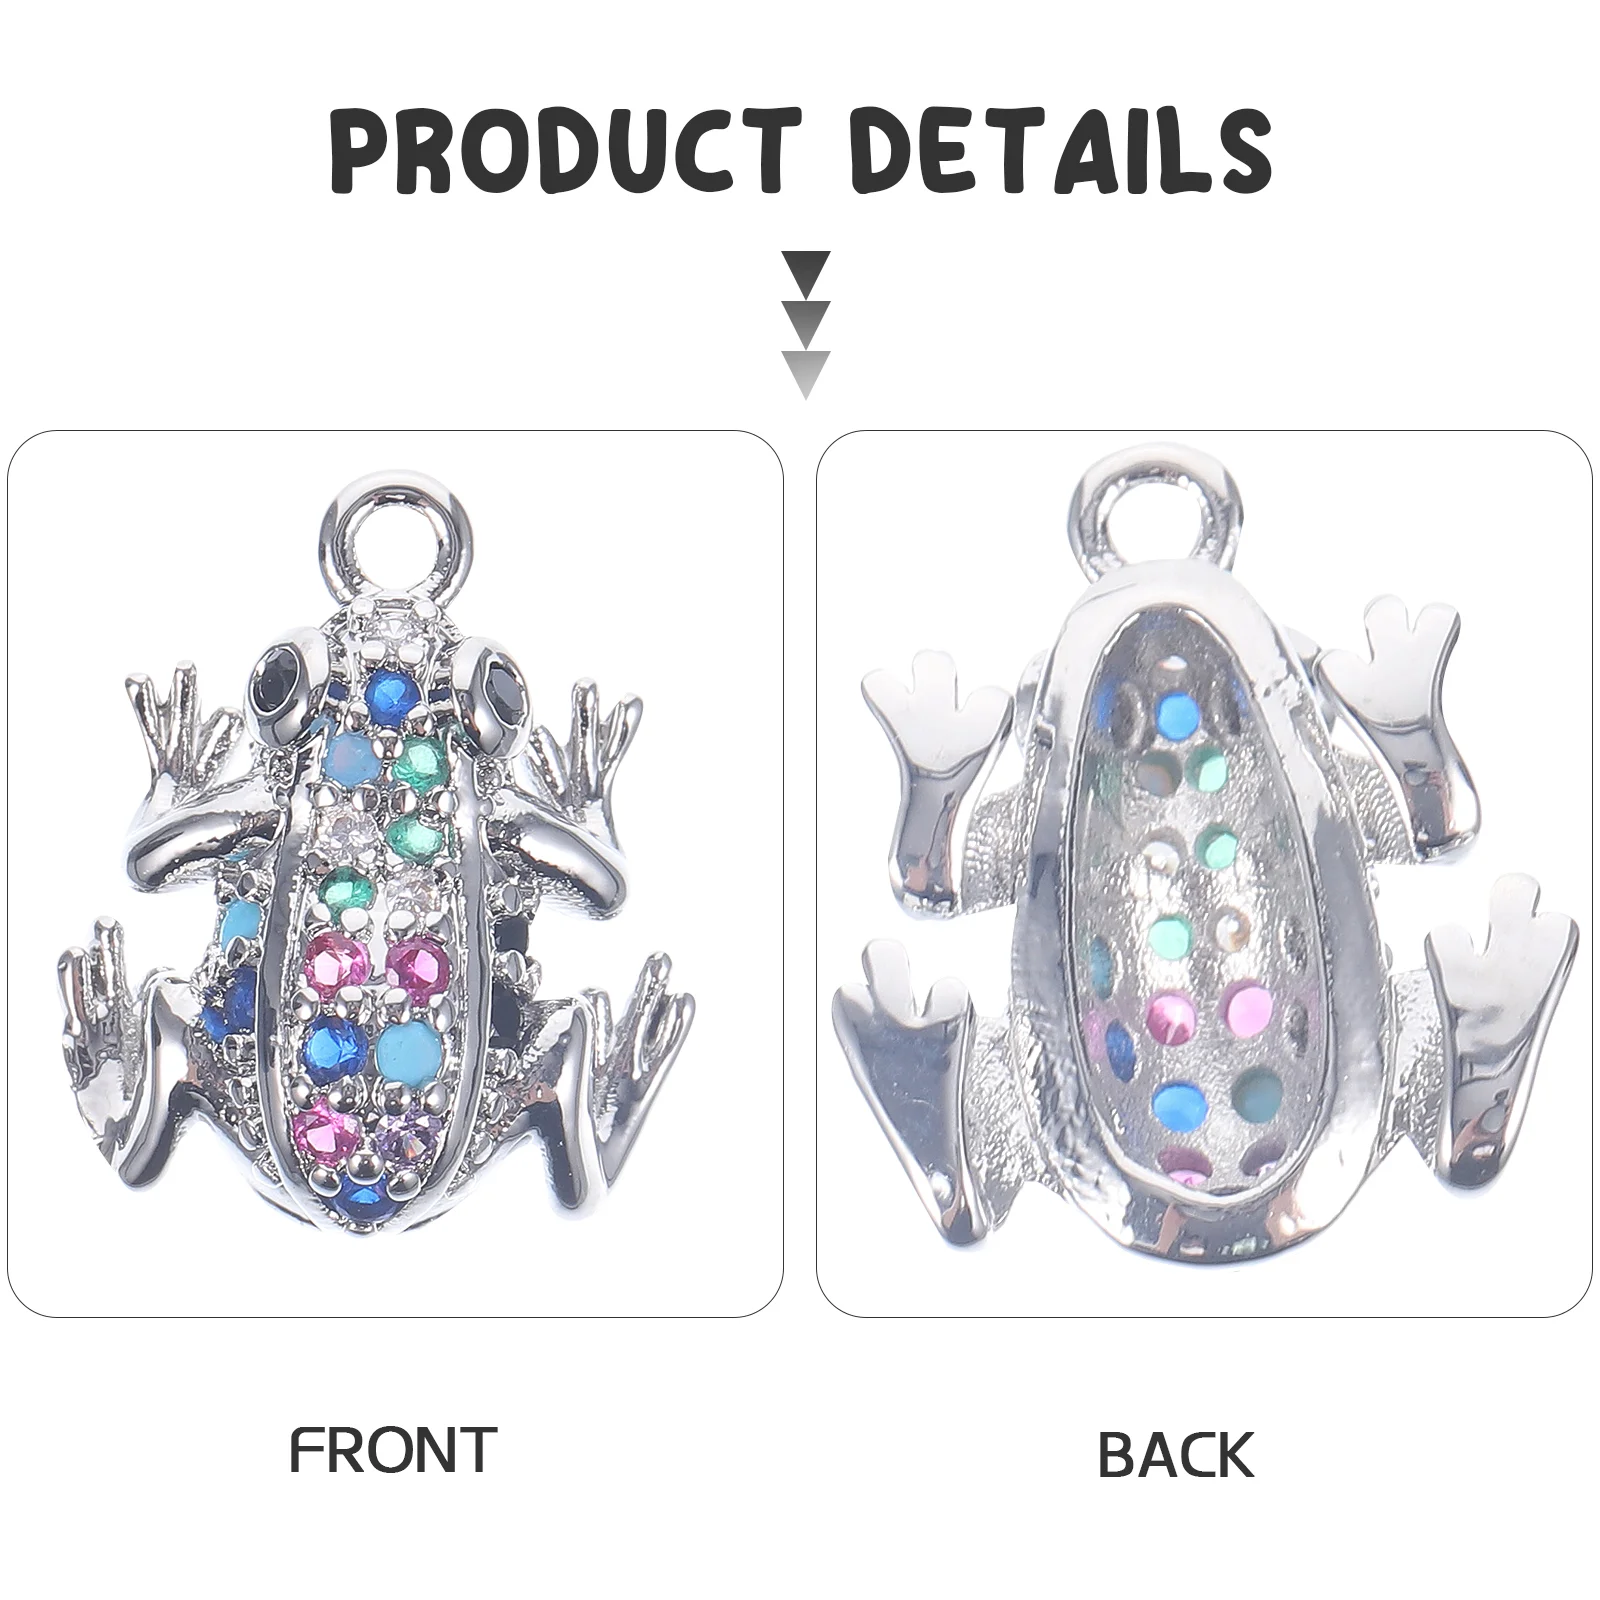 

Fancy Color Diamond Frog Pendant Animal Diy Frog Jewelry Charms Pendant for Bracelet Making Miniature Decors Jewelry Supplies